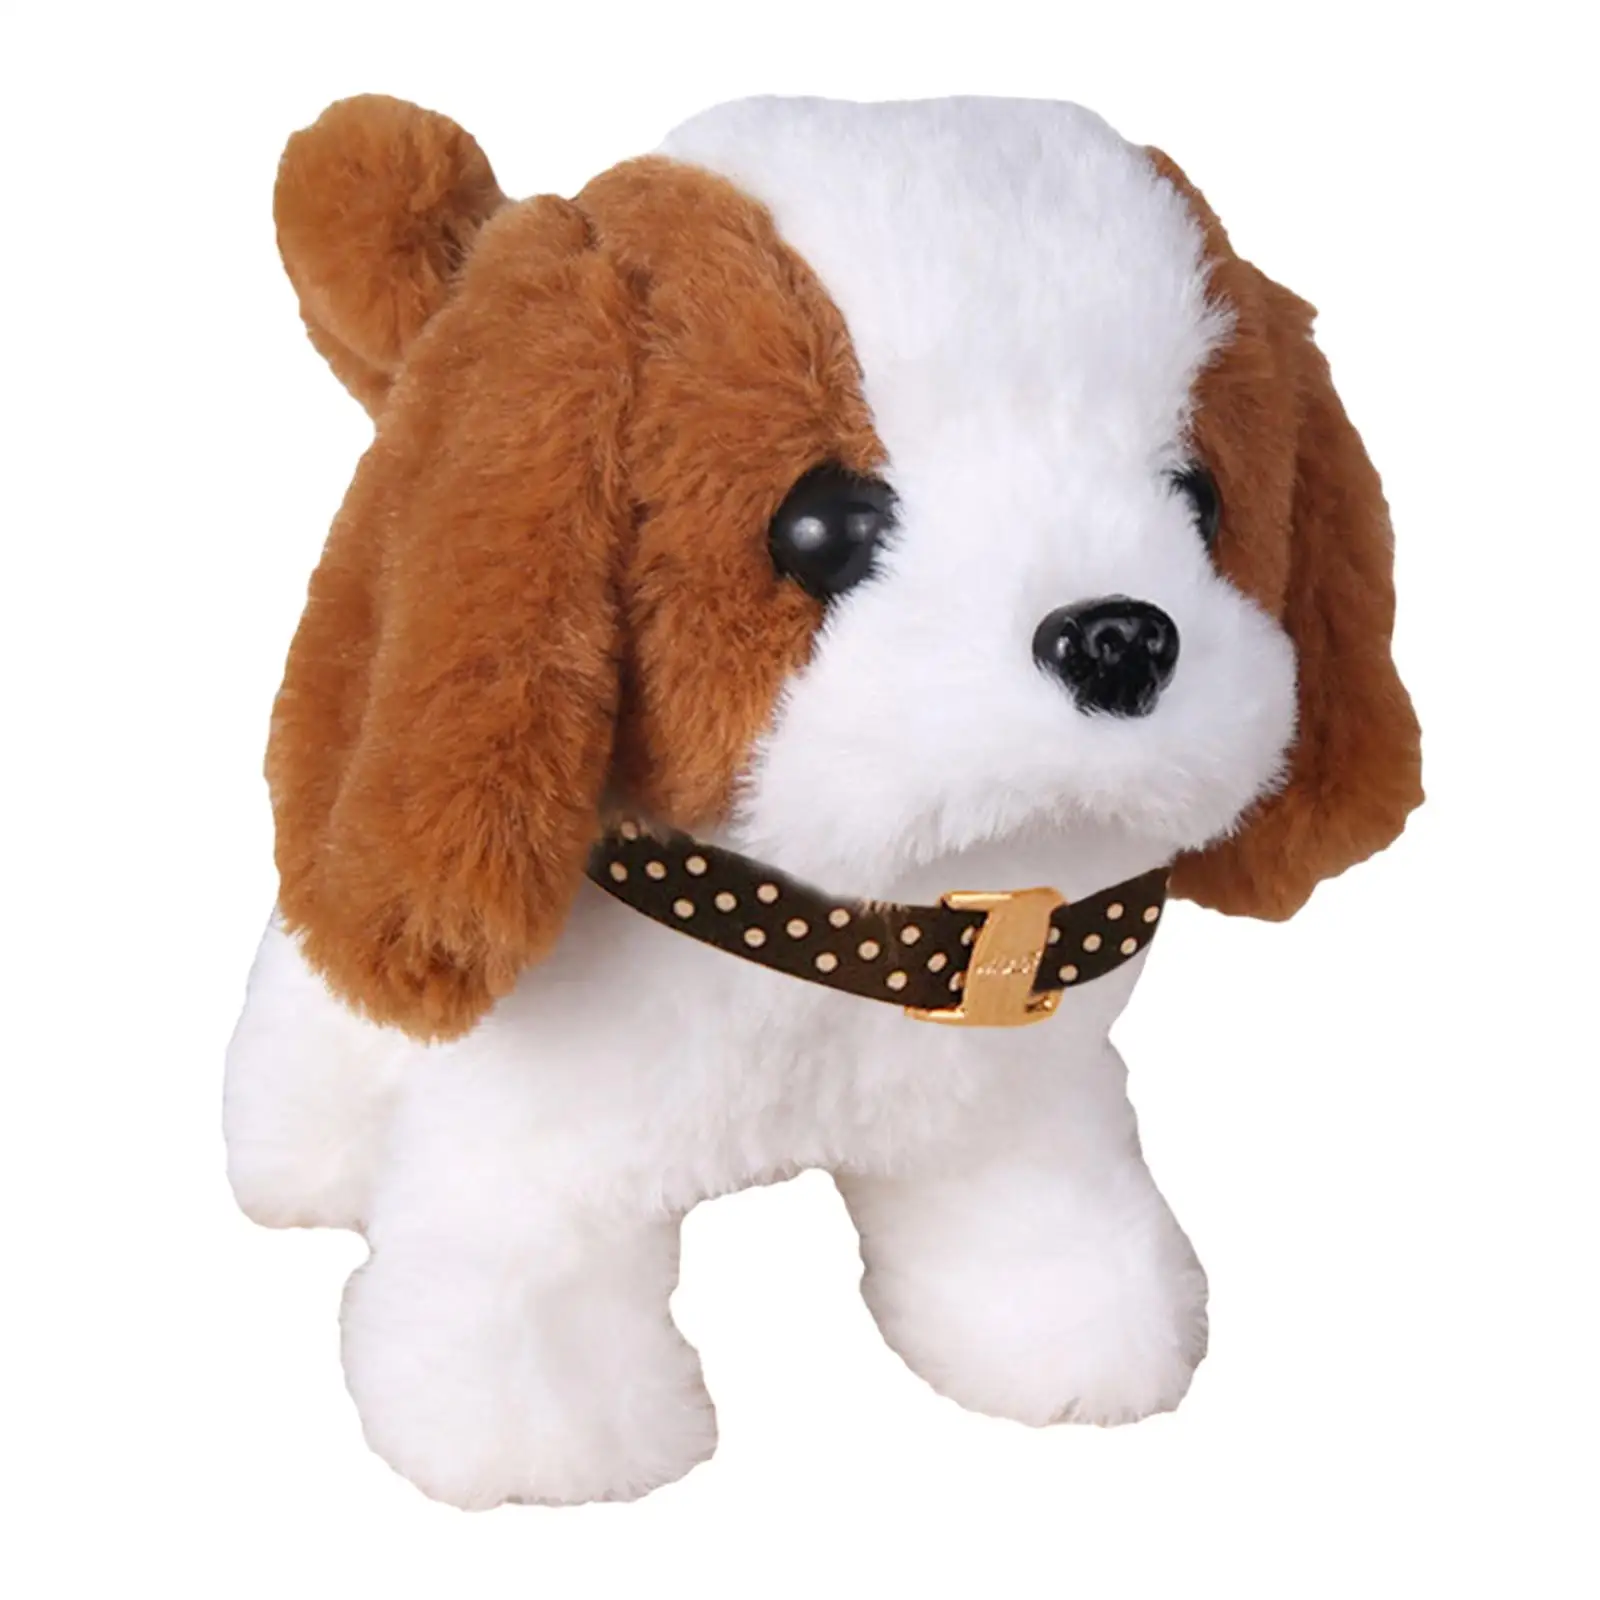 Cartoon Electric Plush Toy Tail Wagging Interesting Toy for Kids Toddlers Girls Gifts